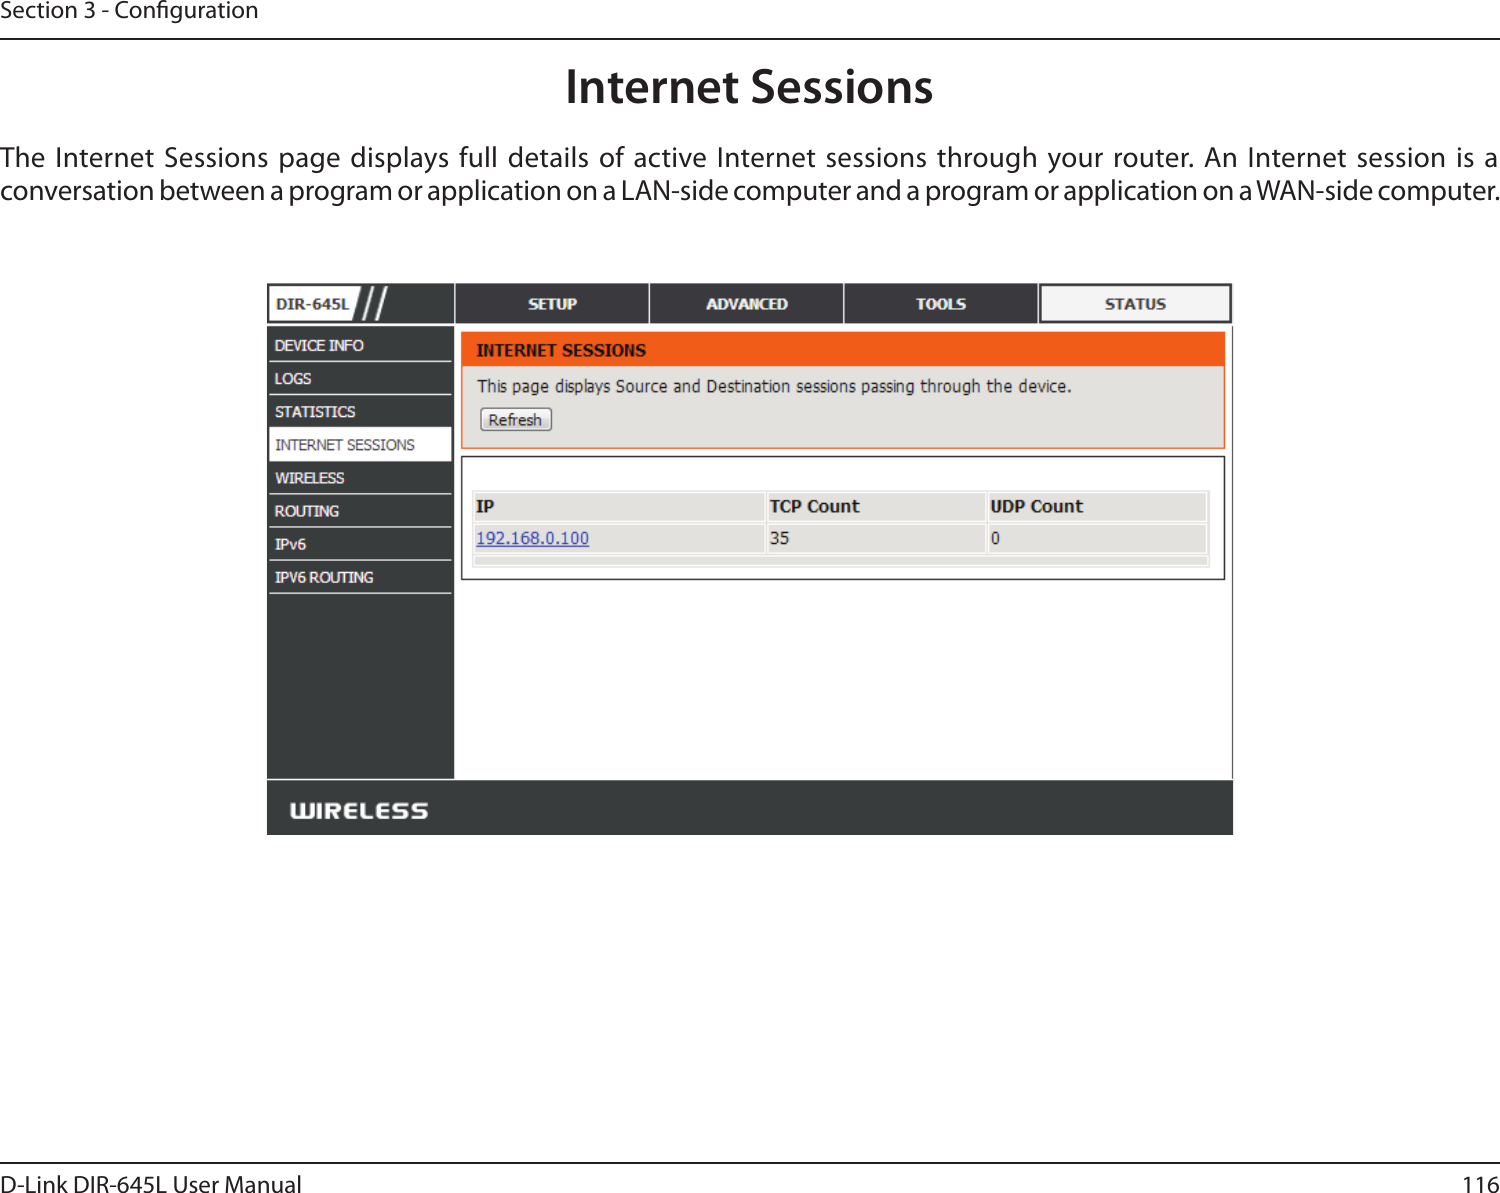 116D-Link DIR-645L User ManualSection 3 - CongurationInternet SessionsThe Internet Sessions page displays full details of active Internet sessions through your router. An Internet session  is  a conversation between a program or application on a LAN-side computer and a program or application on a WAN-side computer. 